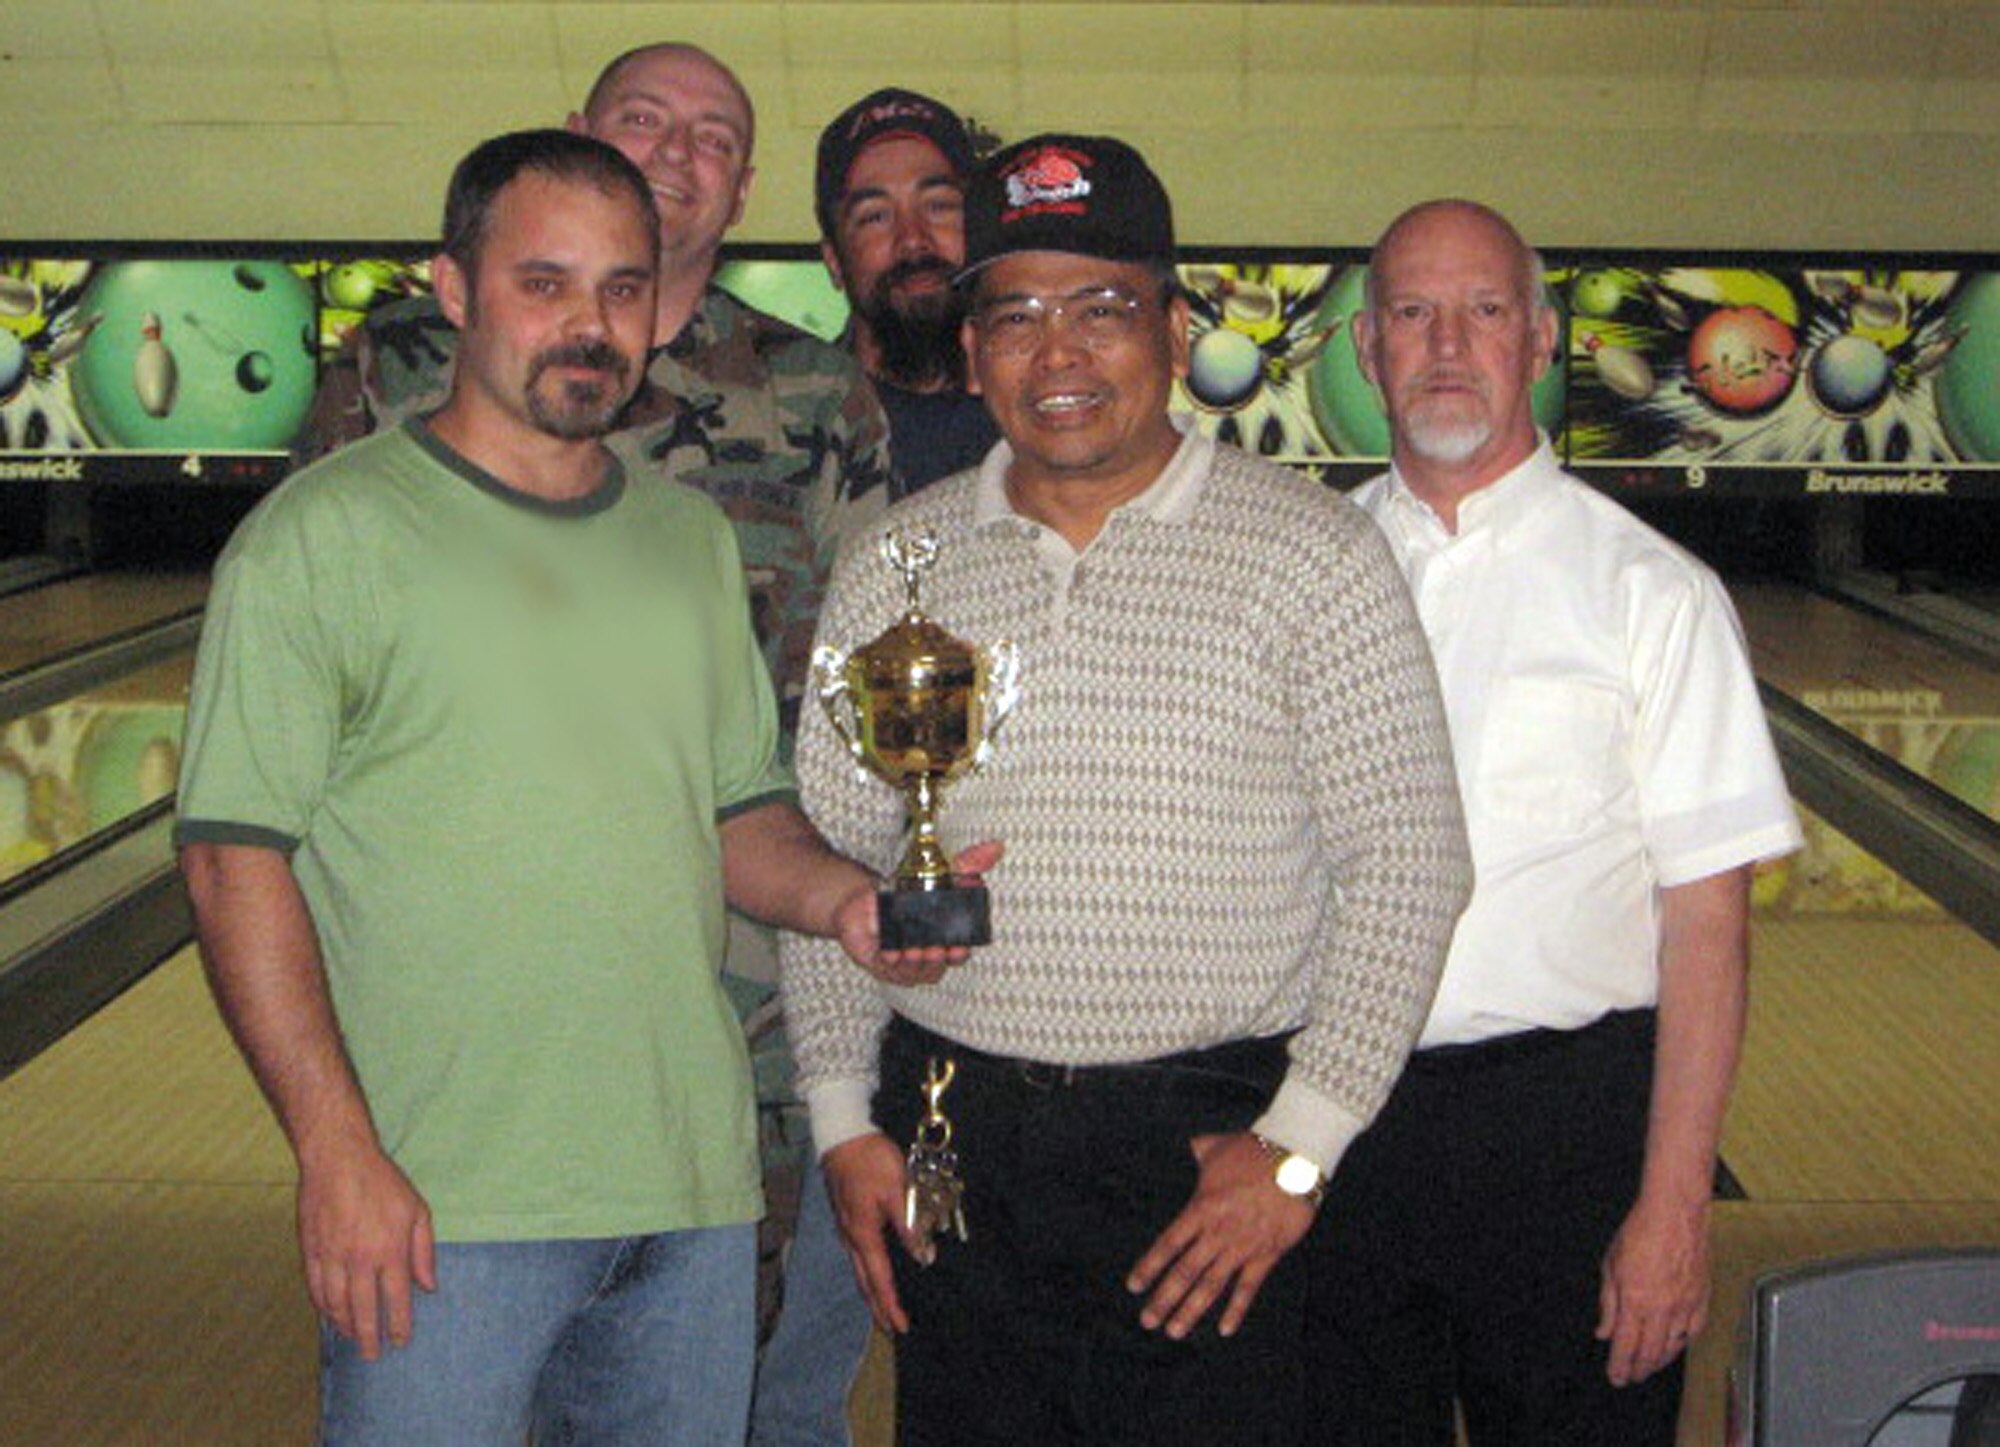 FAIRCHILD AIR FORCE BASE, Wash. – Clockwise from left front: Richie Teller, Tech. Sgt. Chris Prater, Gerry Aguiar, Merl Briggs and Vic Passion pose with their second place trophy from the Fairchild intramural bowling league. The 92nd Civil Engineer Squadron team also included Staff Sgt. John Massad, Steve Csiti, Chito Nacion, Billy Vernor and Dana Whittaker. (U.S. Air Force photo illustration/Jason McCathren)